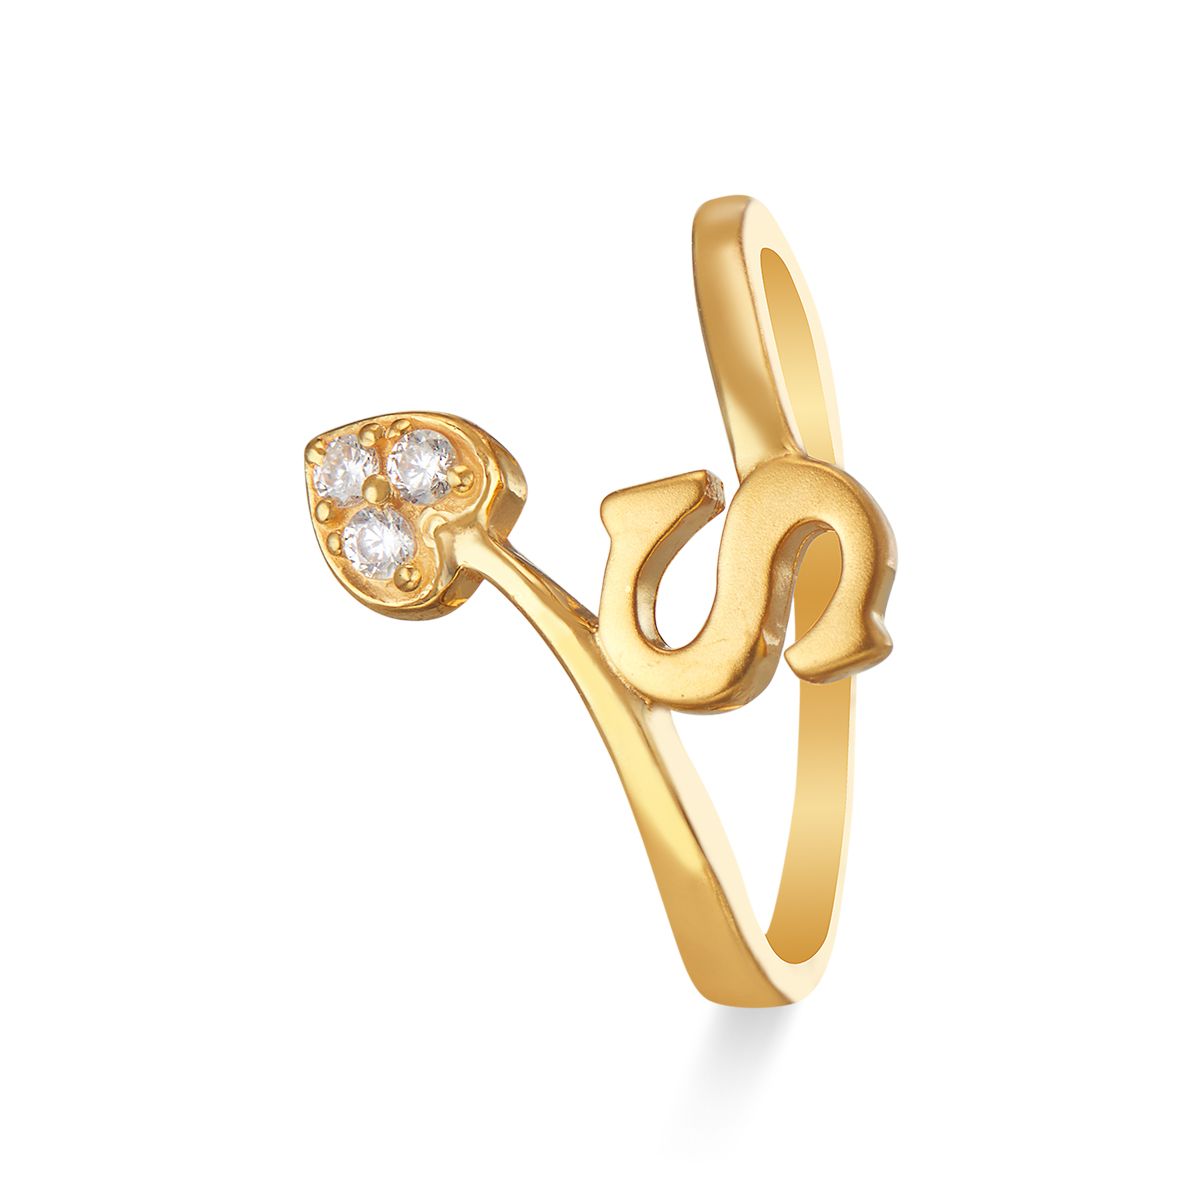 WOMEN'S GOLD RING DESIGNS - WHP Jewellers